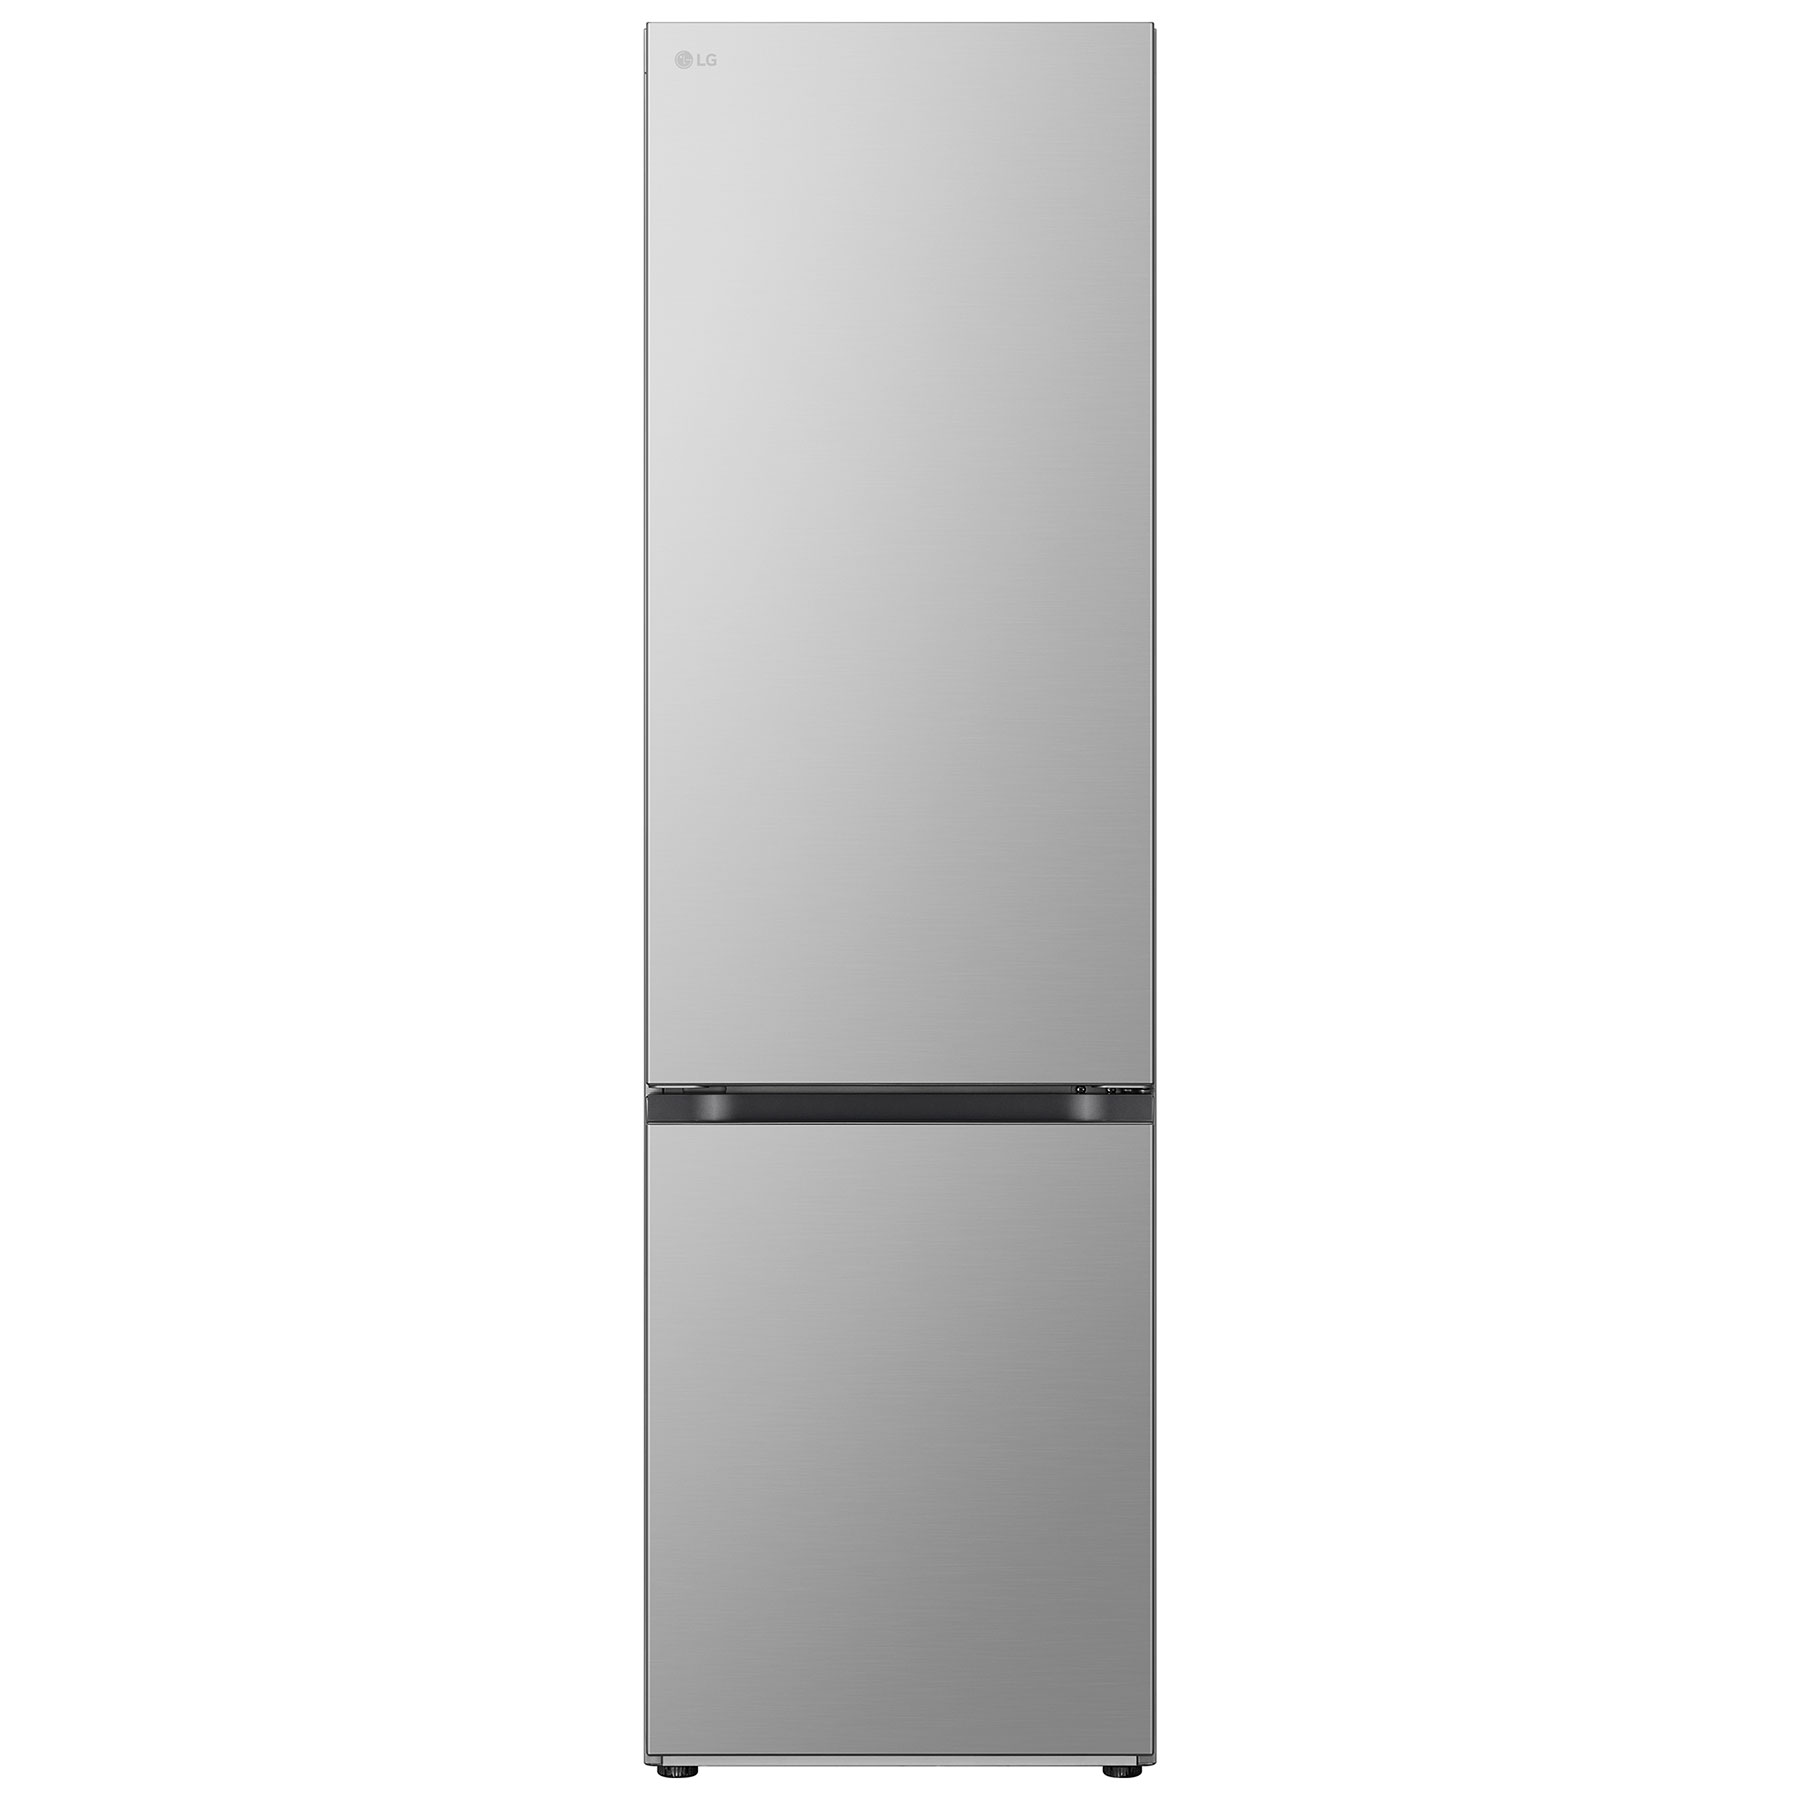 LG GBV3200CPY 60cm Frost Free Fridge Freezer in Silver 2 03m C Rated